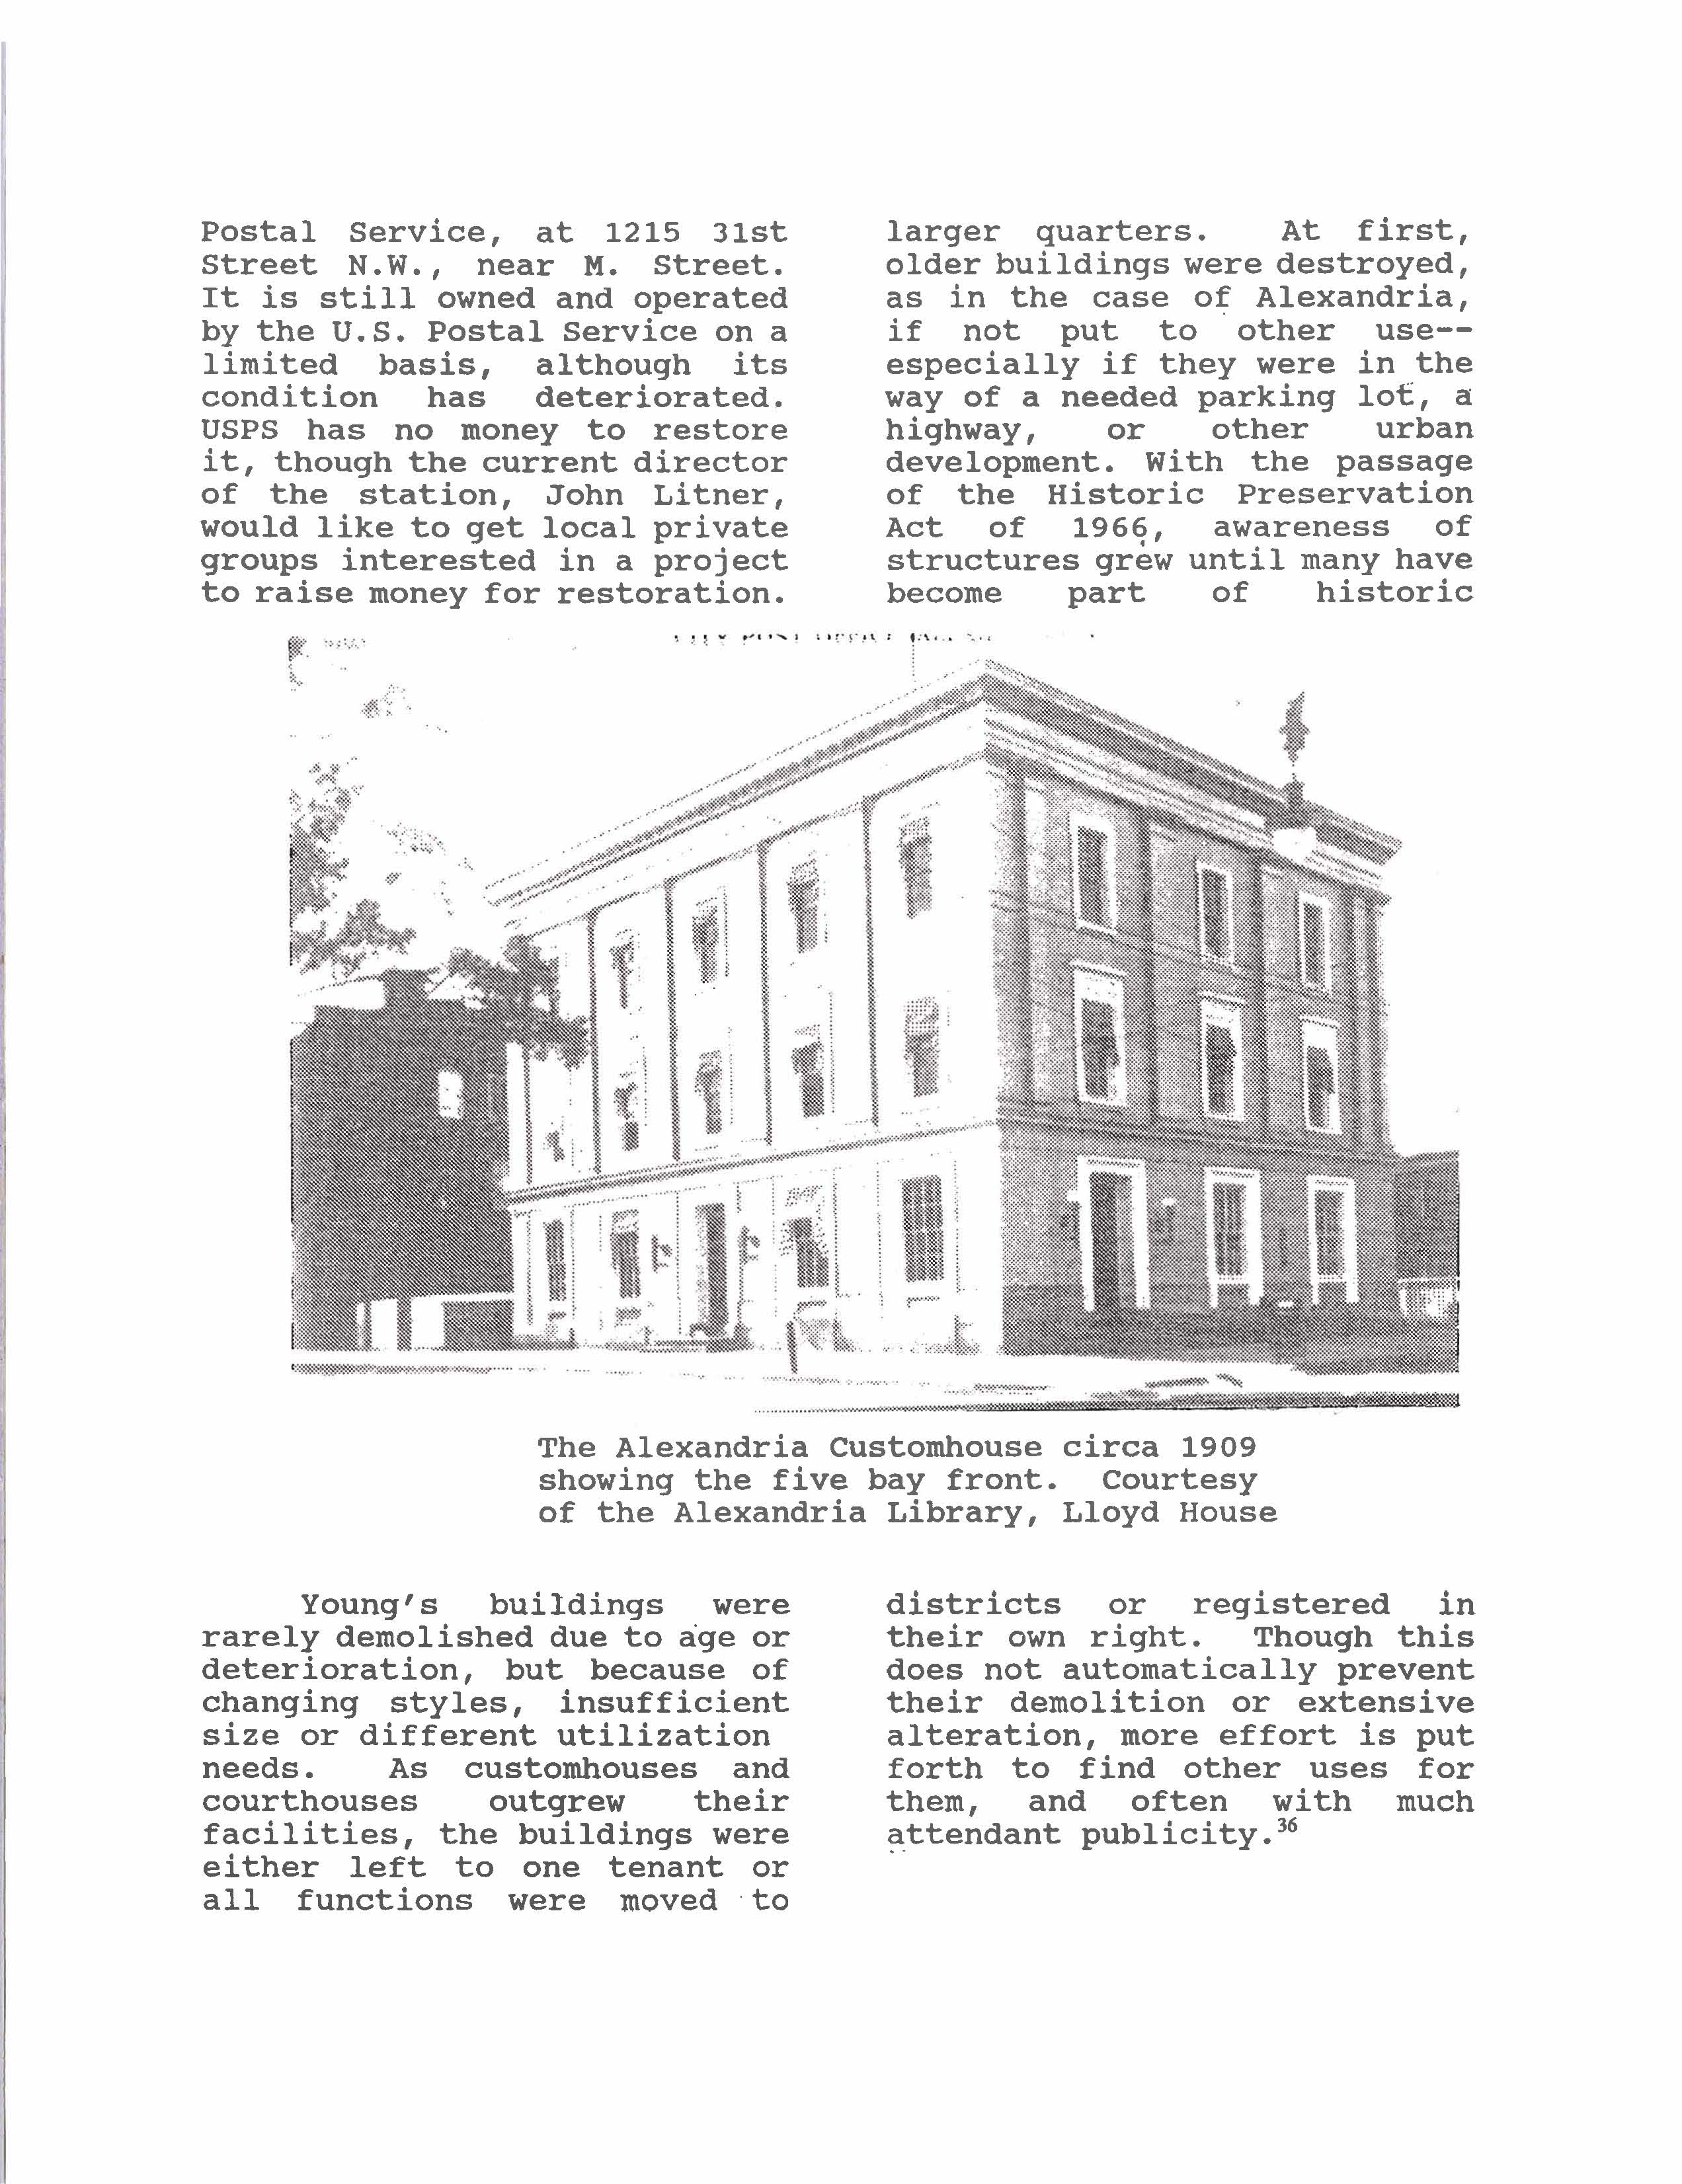 Ammi B. Young, Supervising Architect of the Treasury and his 1858 Alexandria Post Office and Customhouse, page 10 of 16